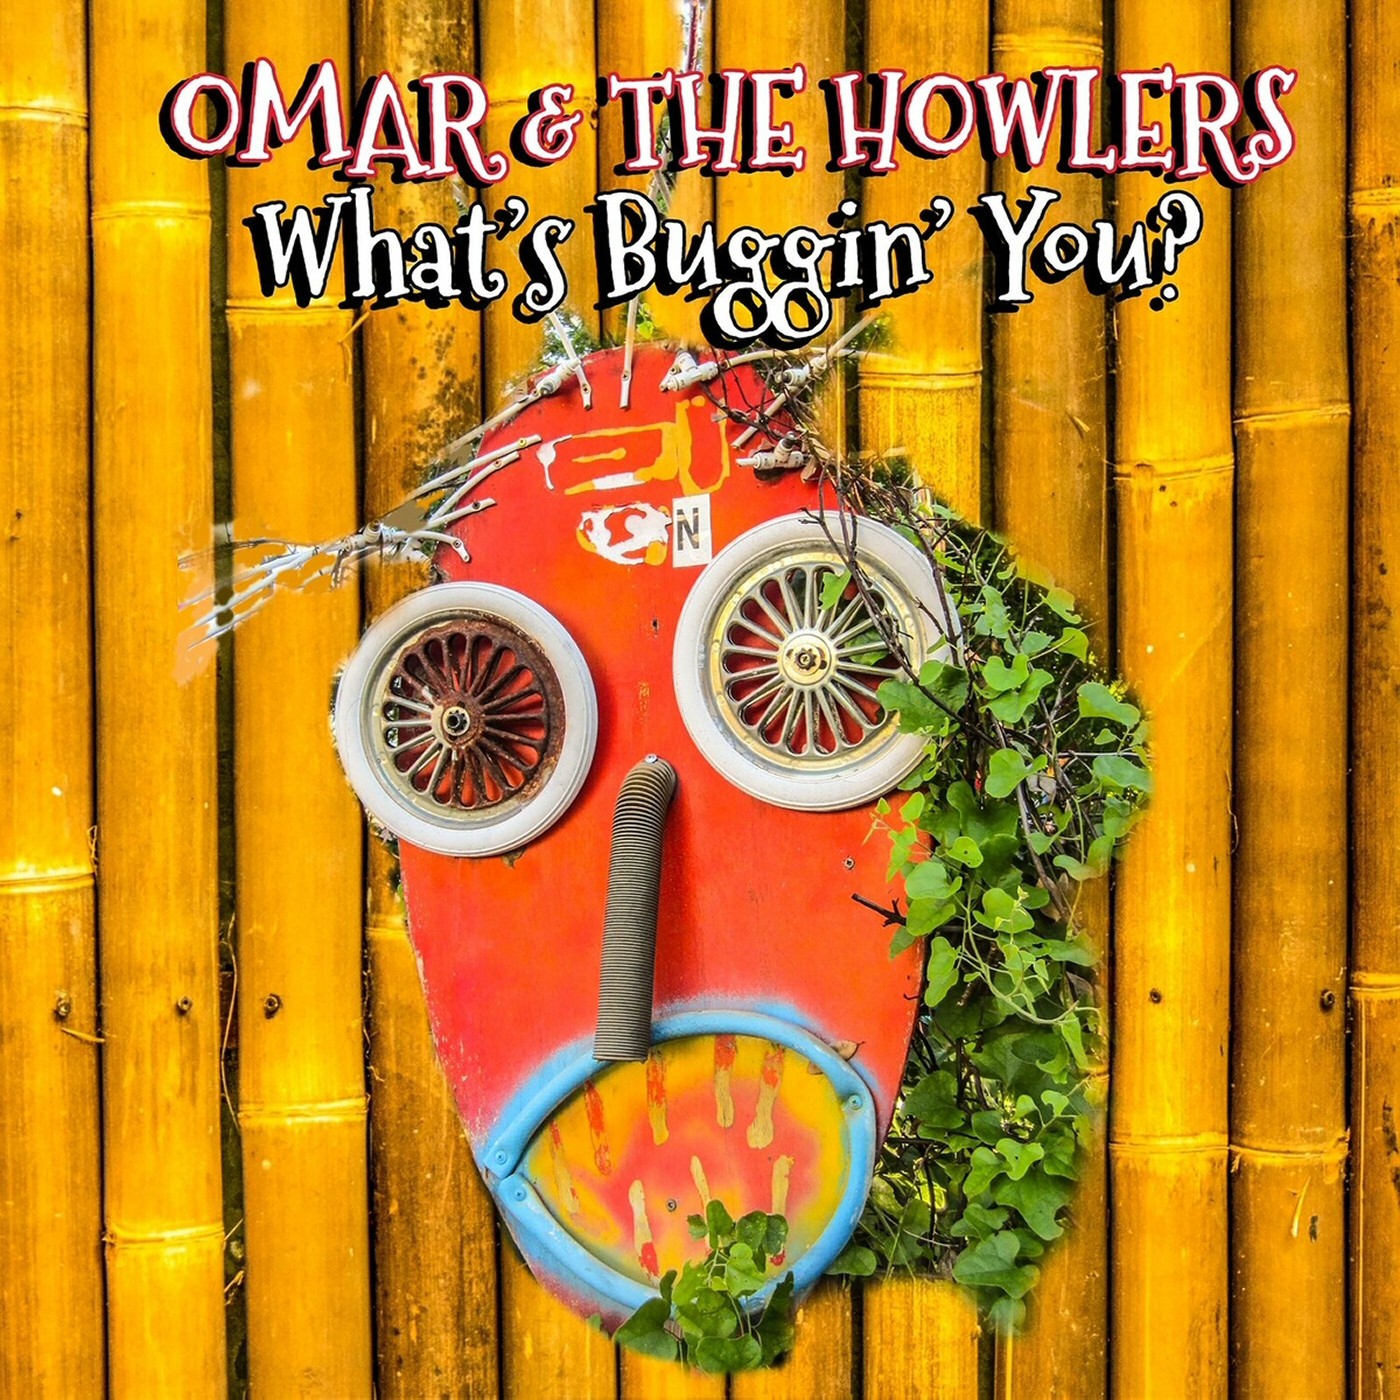 Omar & The Howlers - What's Buggin' You